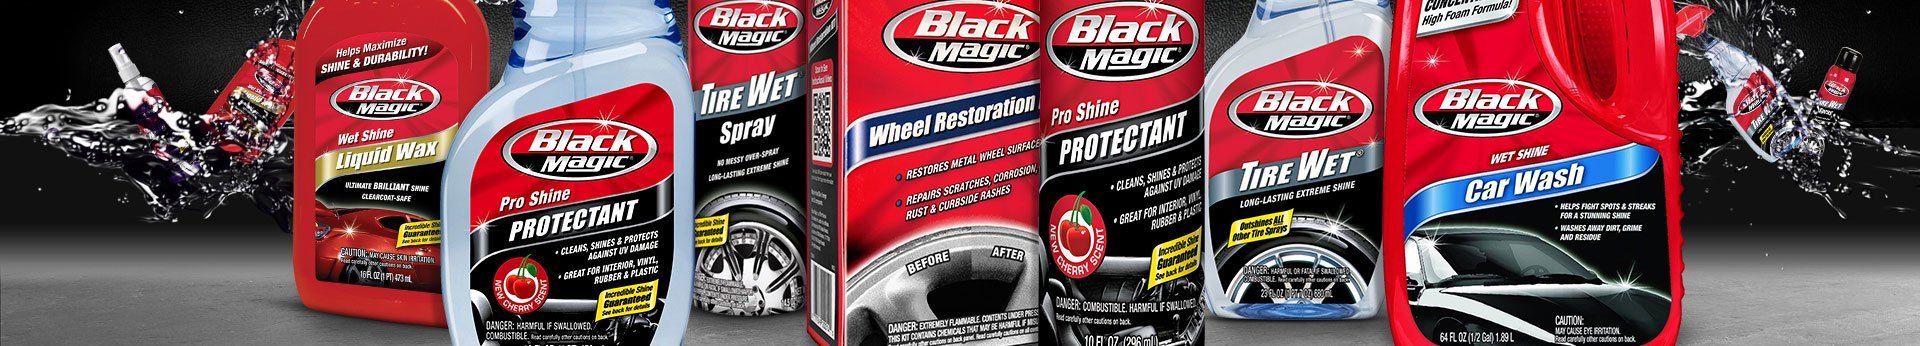 Black Magic 800002220 Tire Wet Foam, 18 oz. - Specially Formulated Thick  Tire Spray Foam Clings to Tires to Dissolve and Clean Dirt While Shining  and